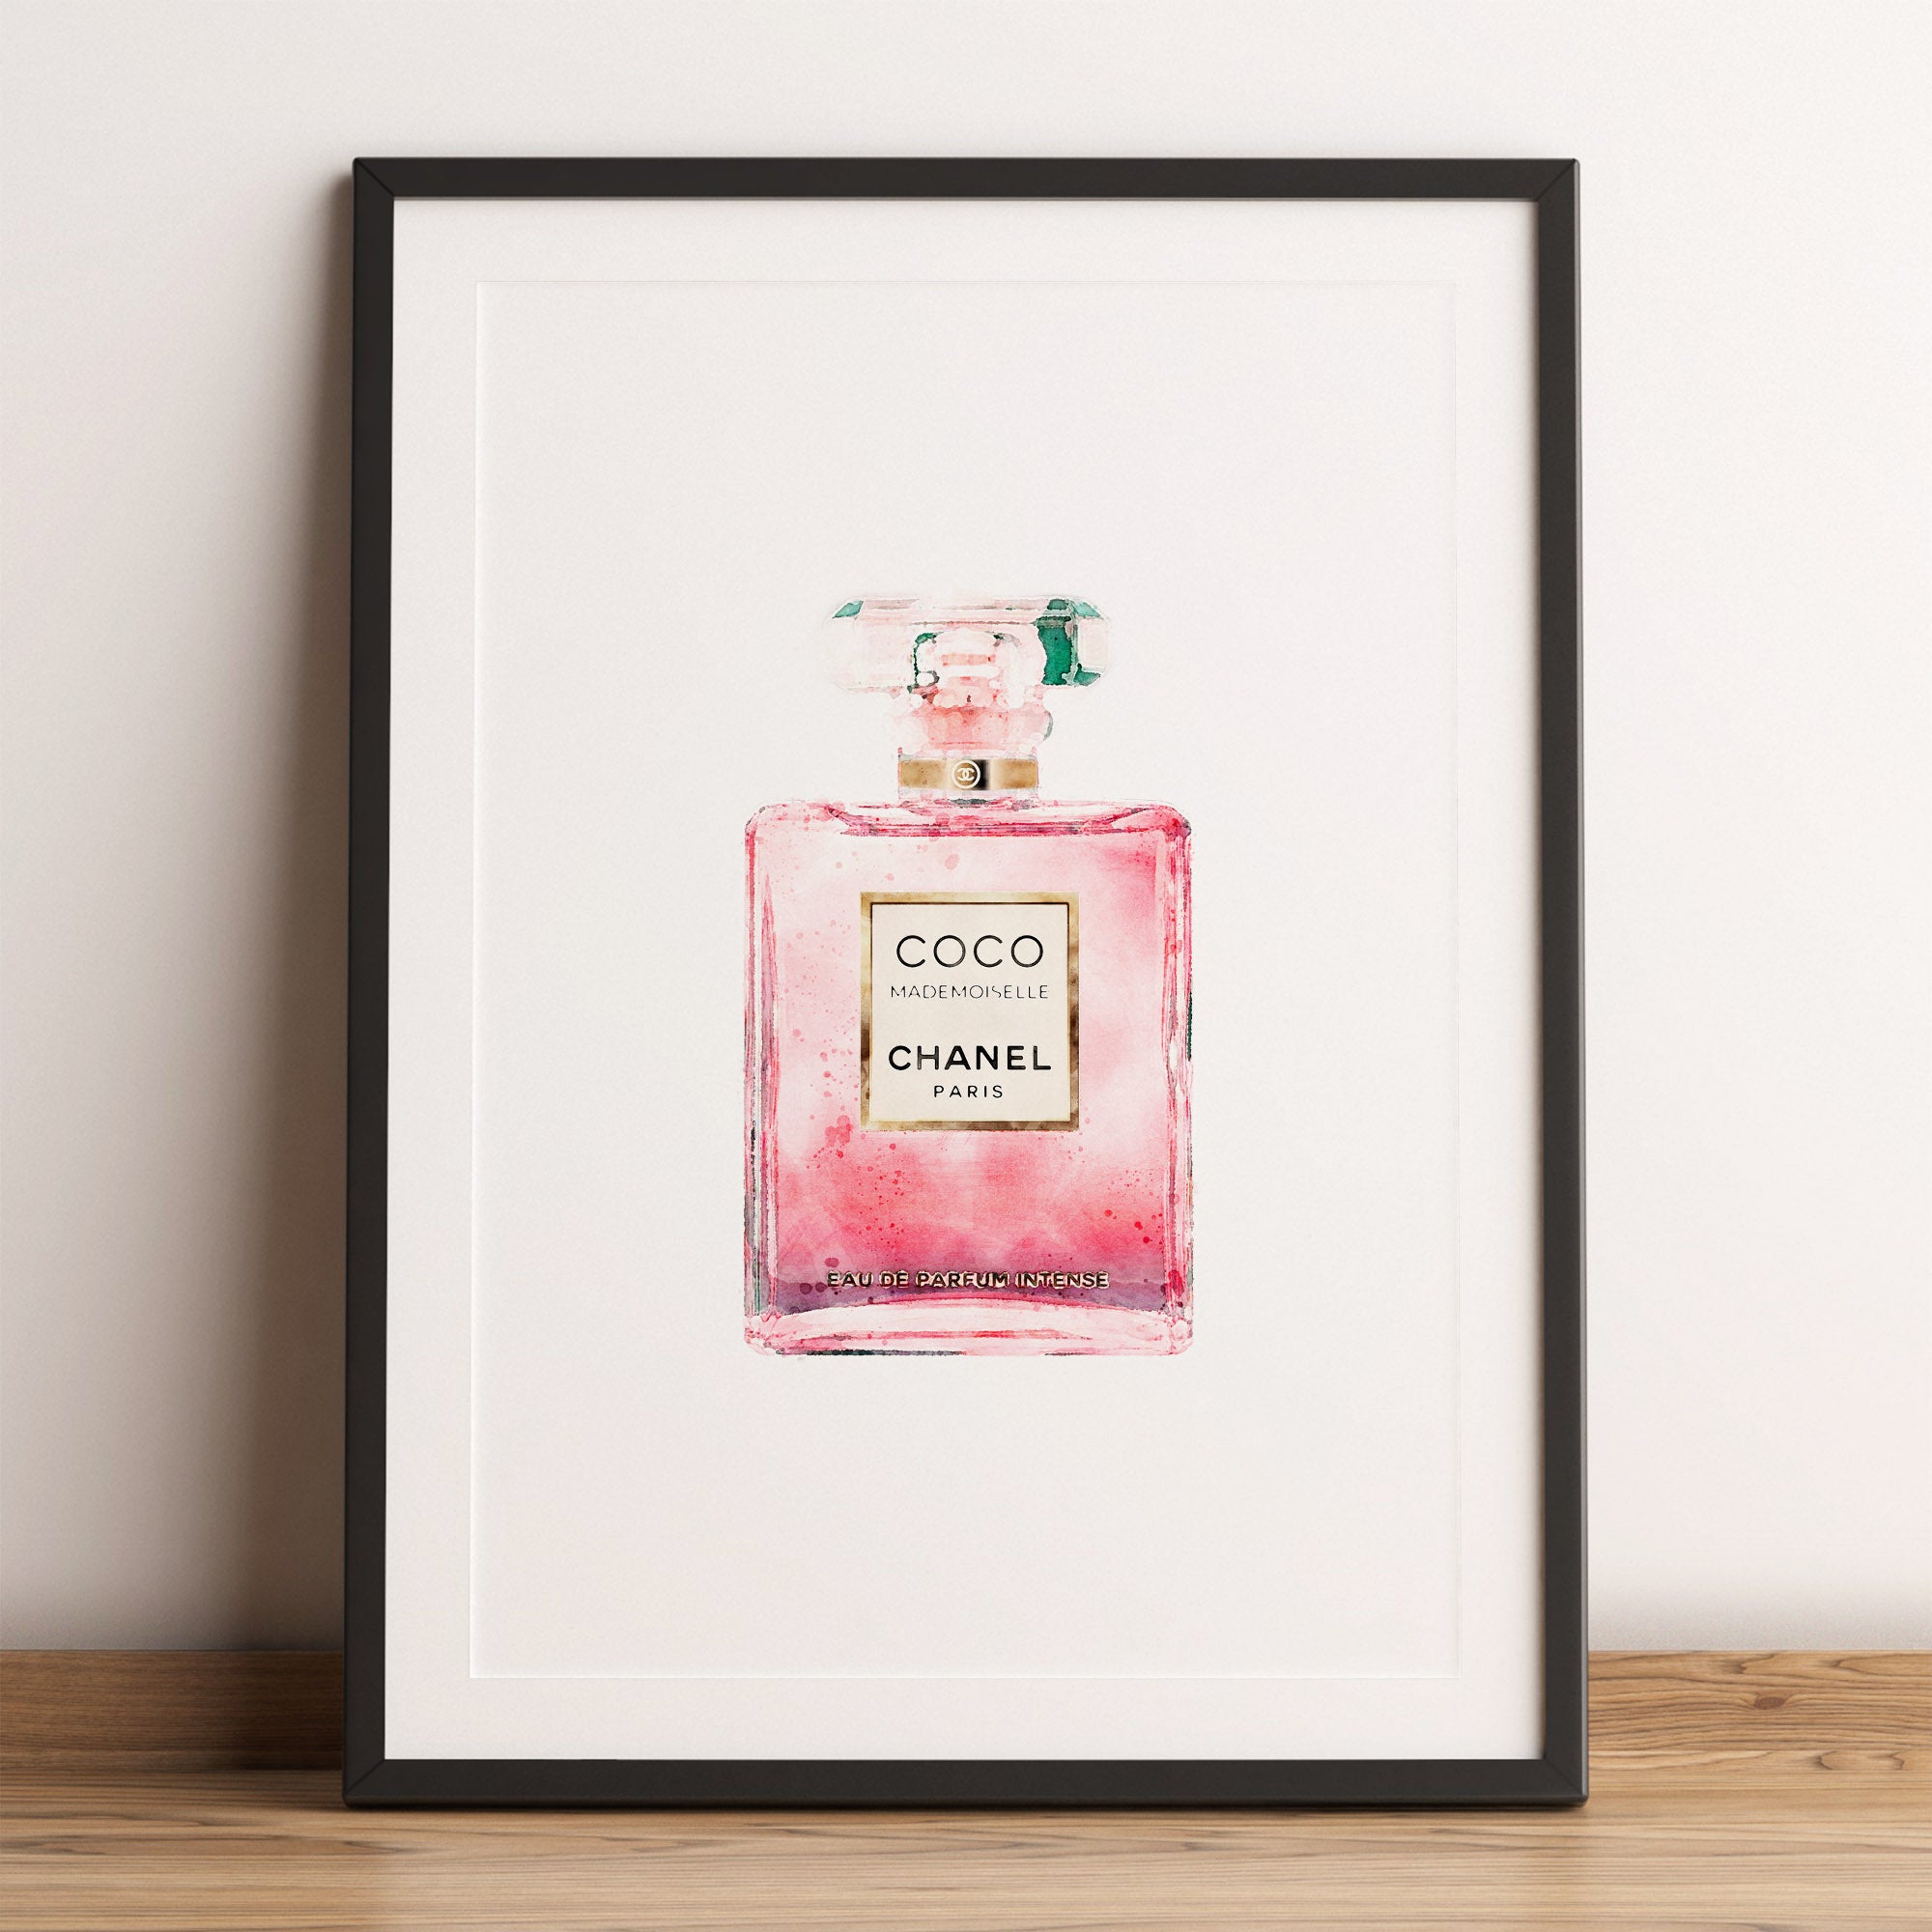 Coco Chanel Perfume Bottle Print  Pink Roses Watercolor Wall Art   TemproDesign